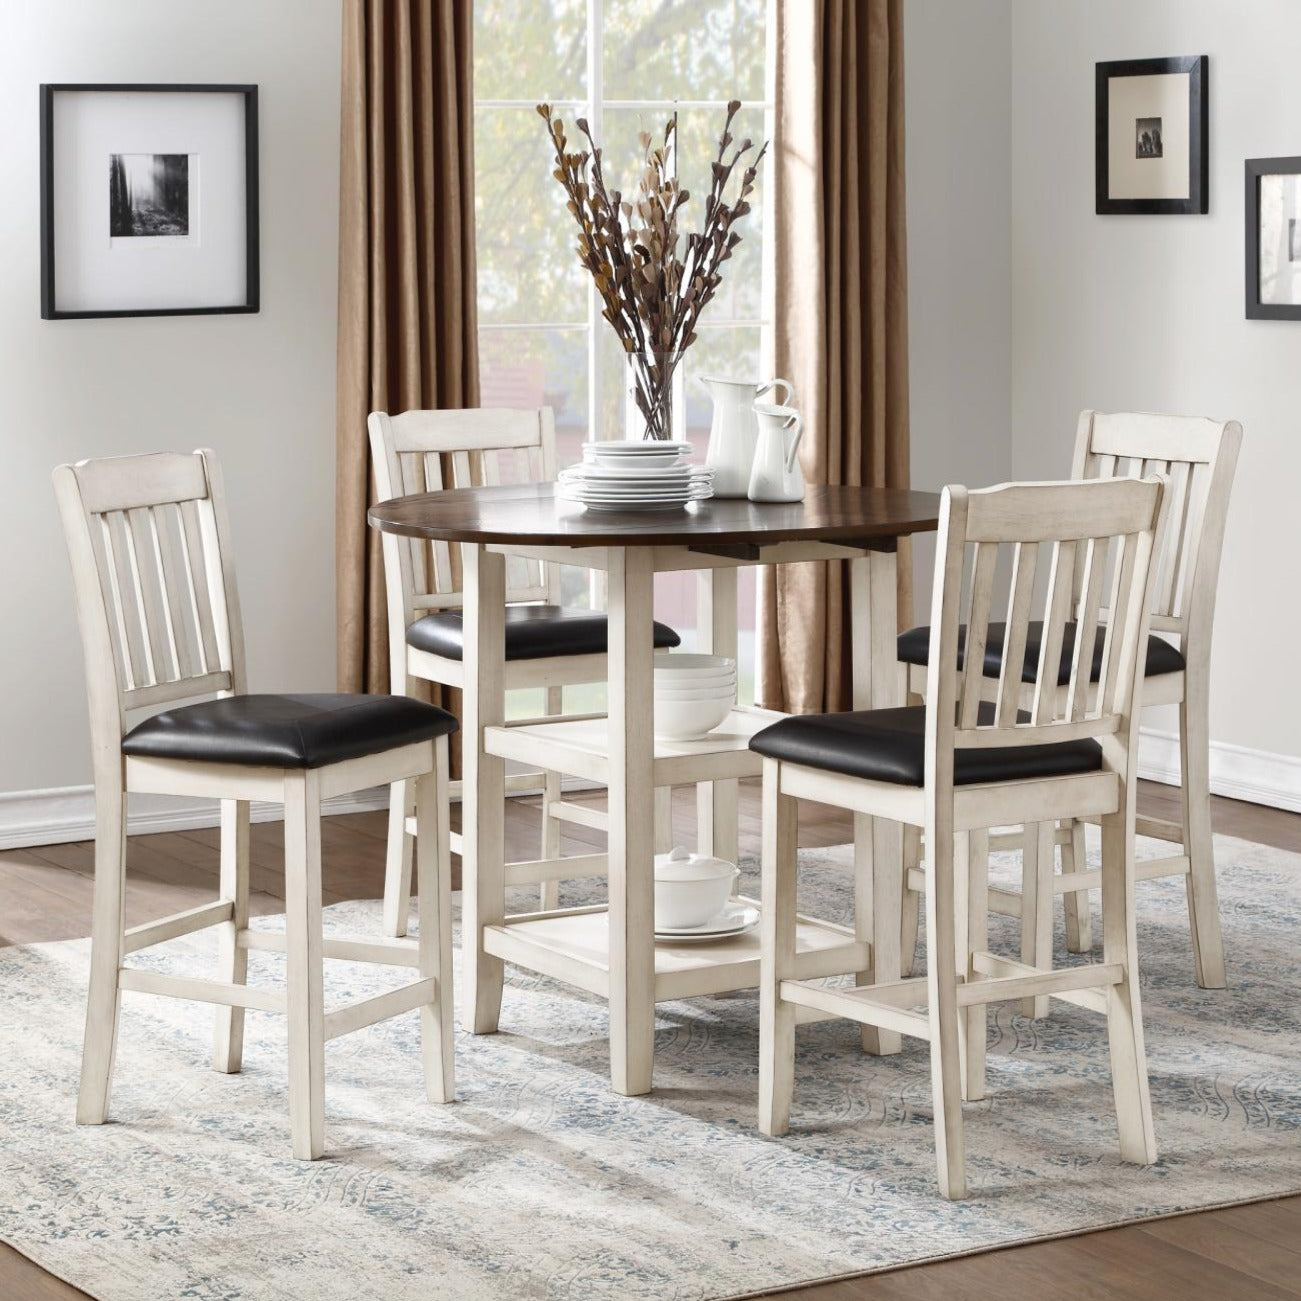 Dining Kiwi 5 Piece Table & Chairs